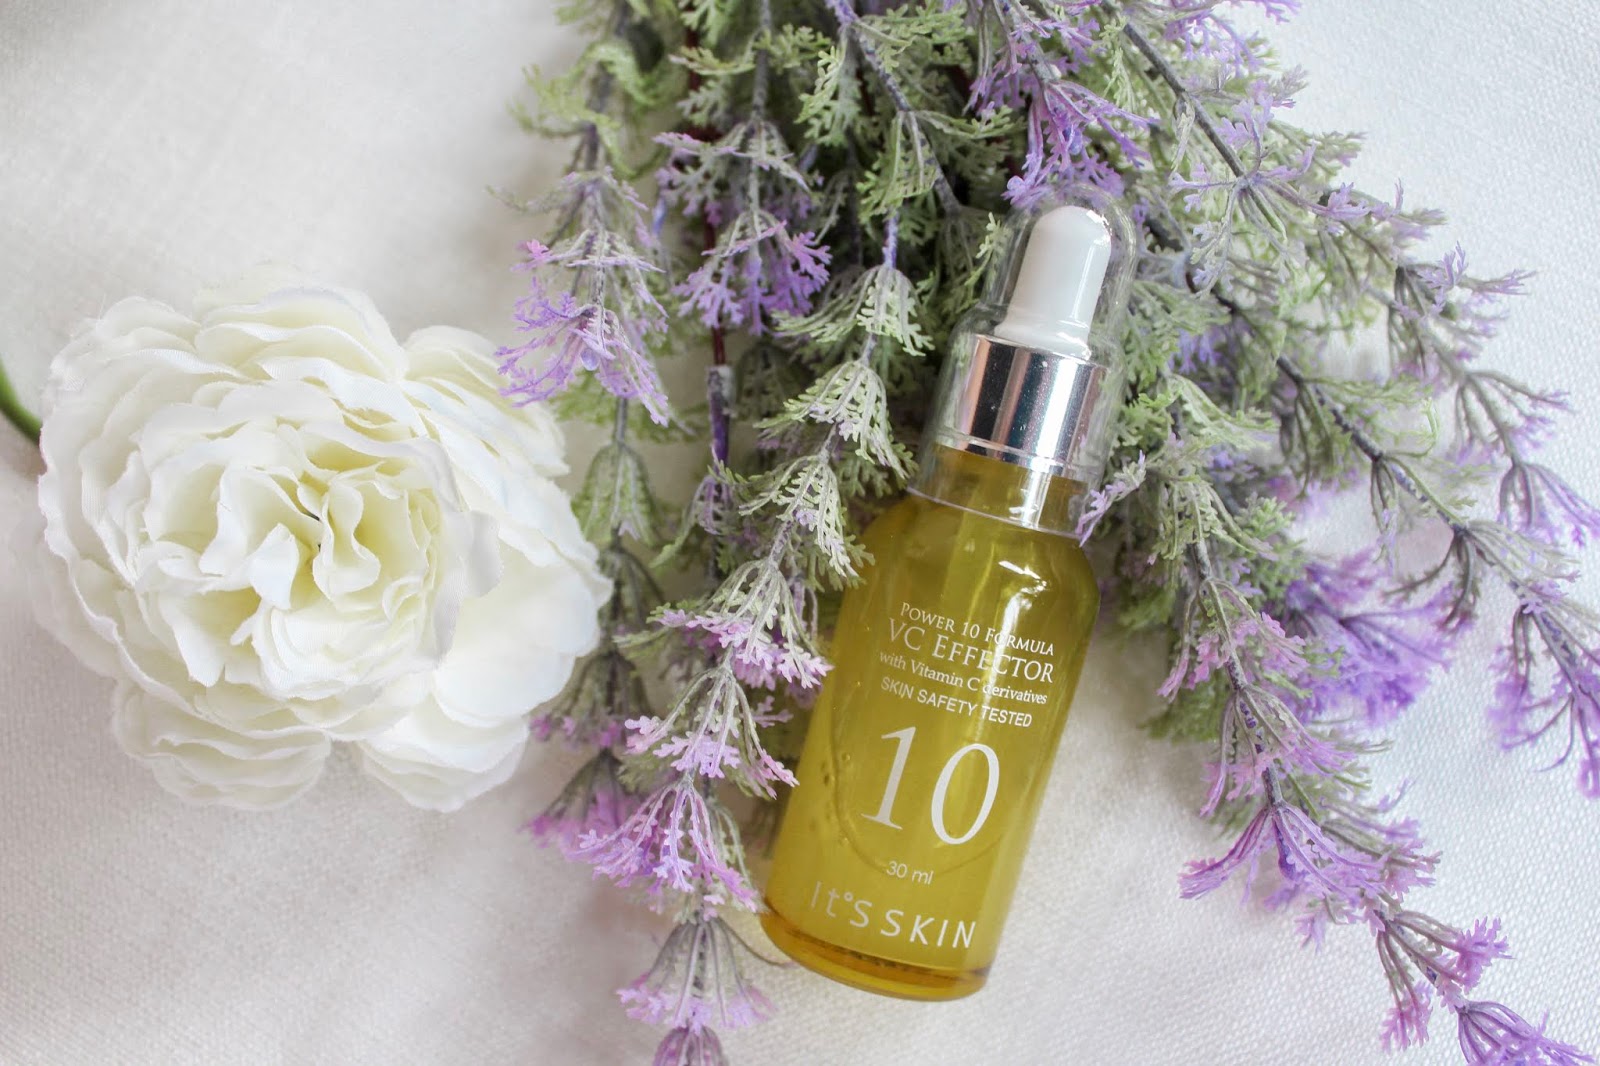 IT'S SKIN POWER 10 FORMULA VC EFFECTOR REVIEW